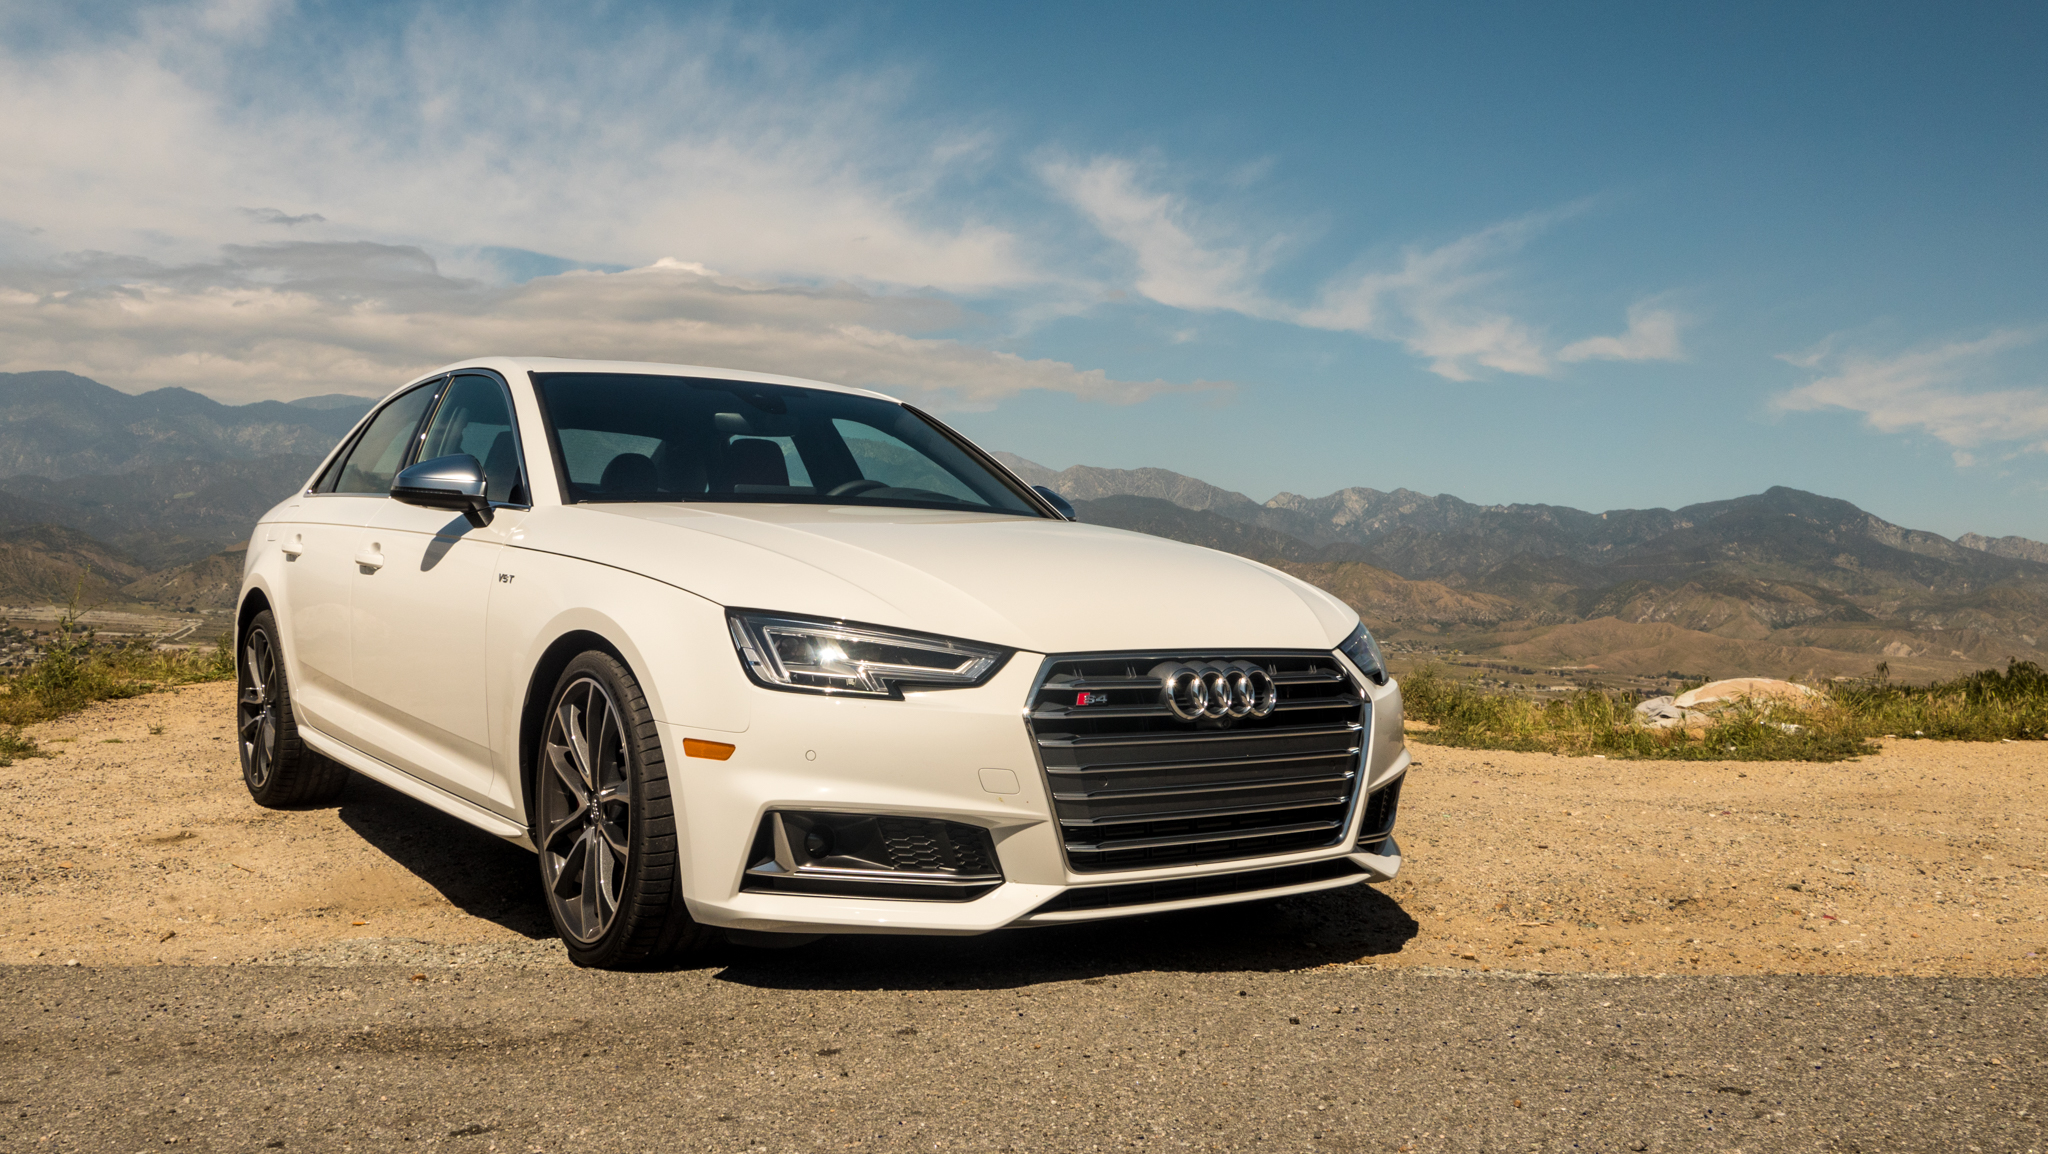 Revenge of the Nerds: The all-new 2018 Audi S4 and S5 | Ars Technica